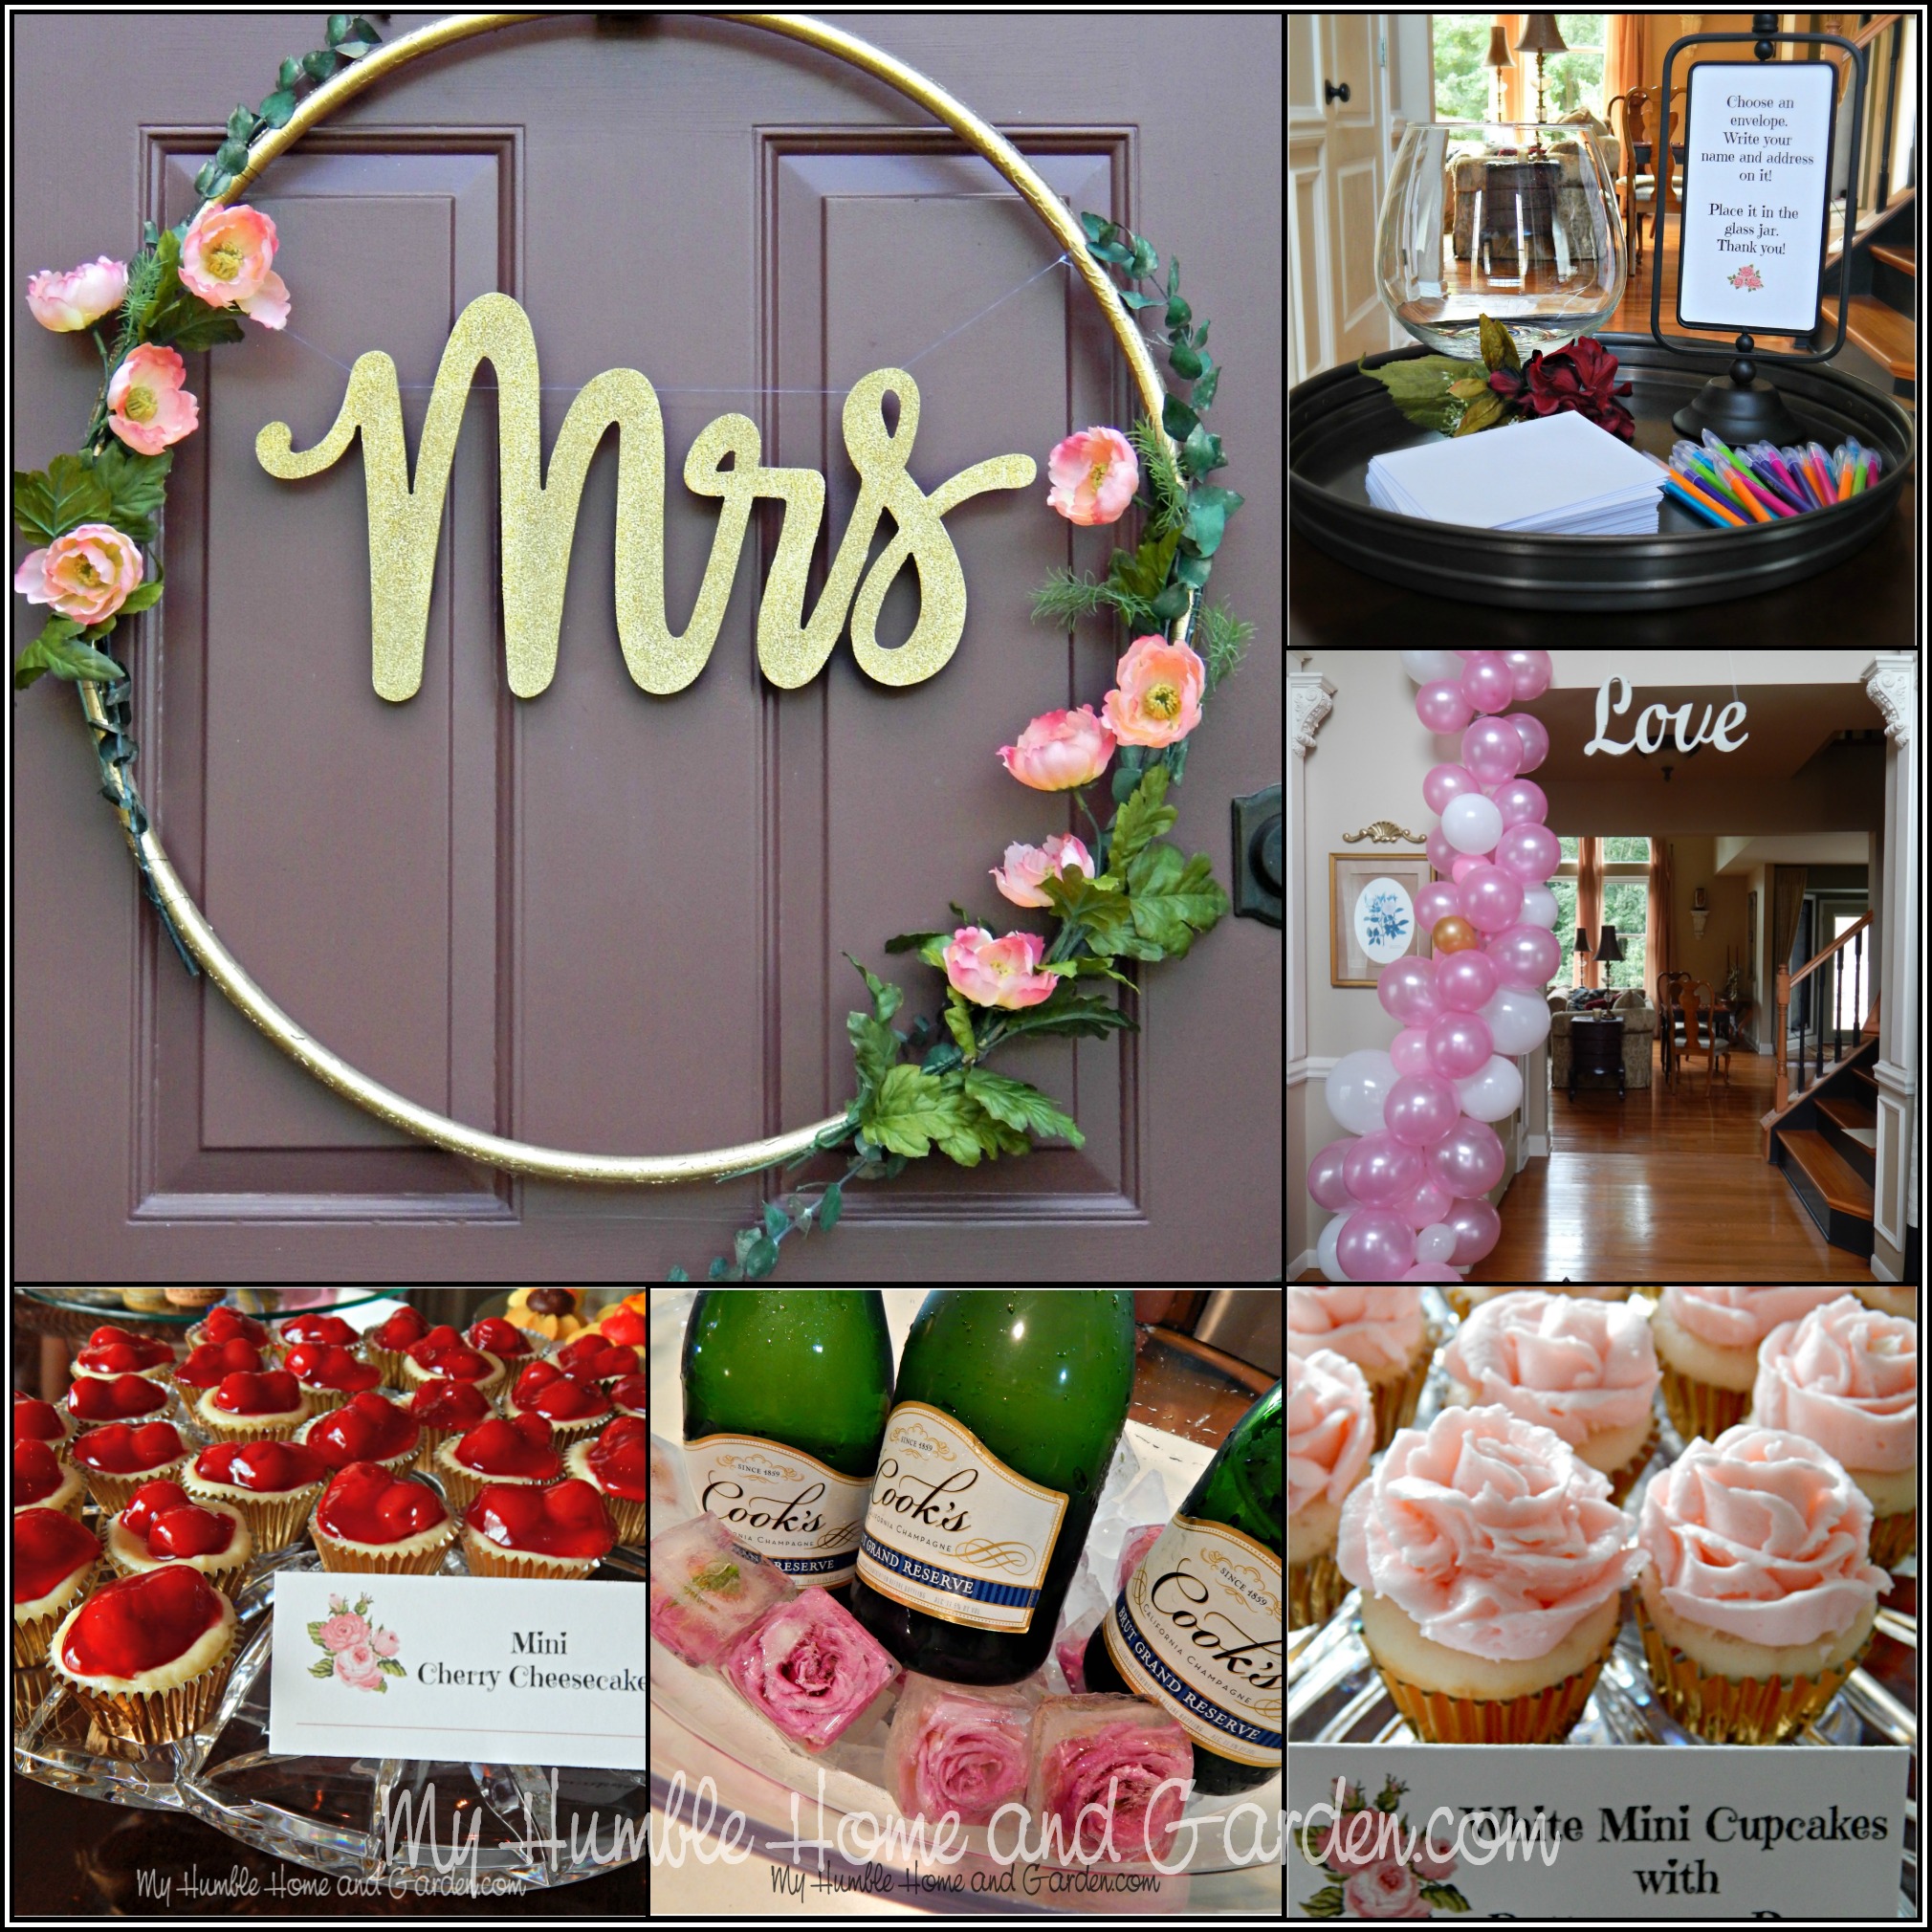 Do You Really Need A Theme For A Bridal Shower? - My Humble Home and Garden